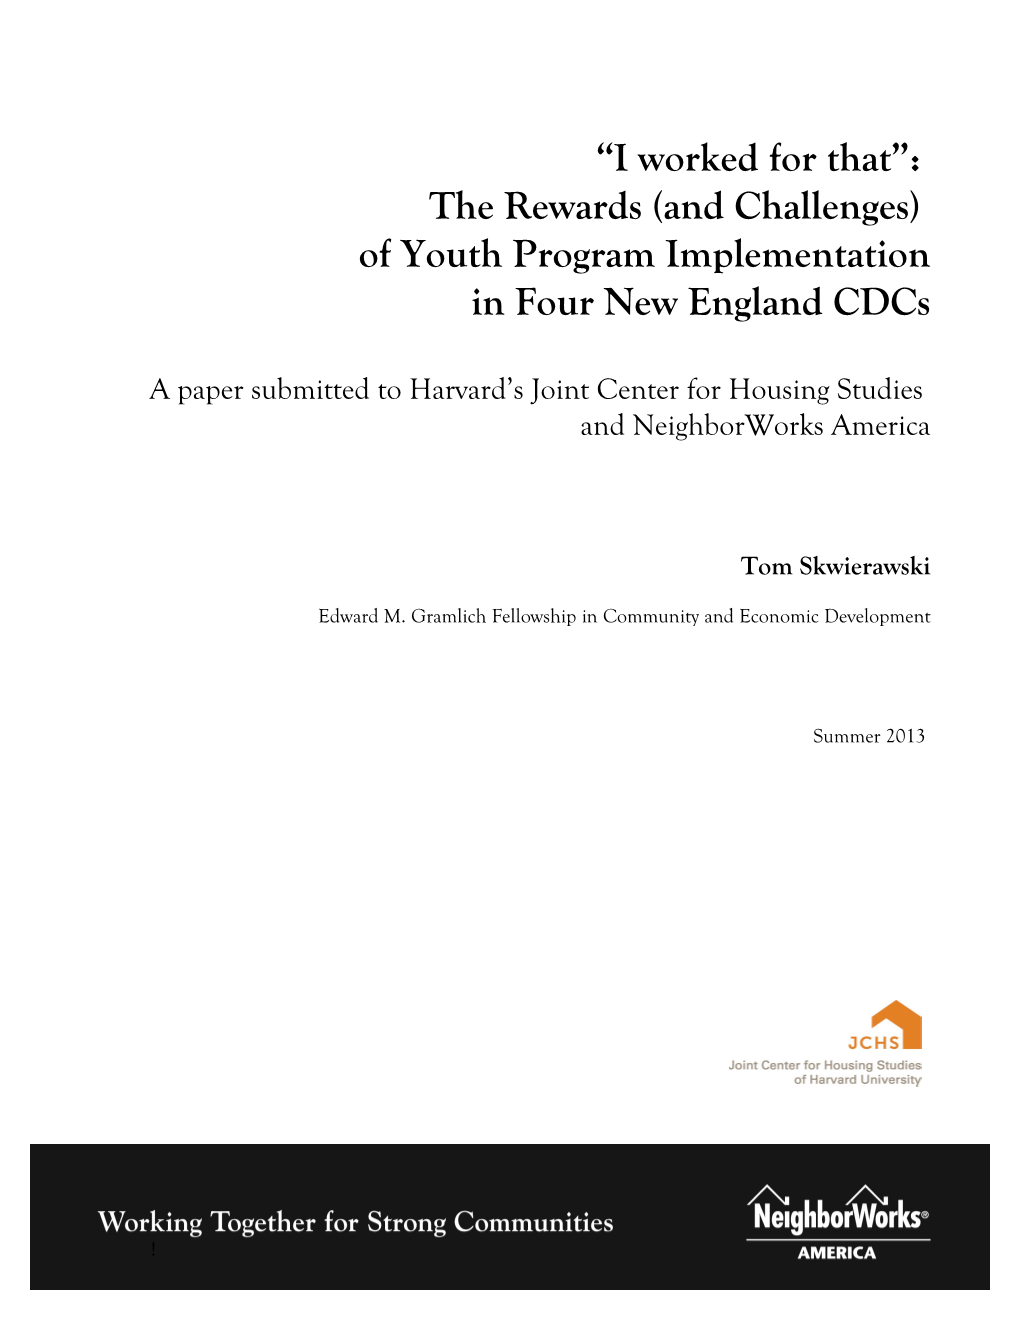 “I Worked for That”: the Rewards (And Challenges) of Youth Program Implementation in Four New England Cdcs